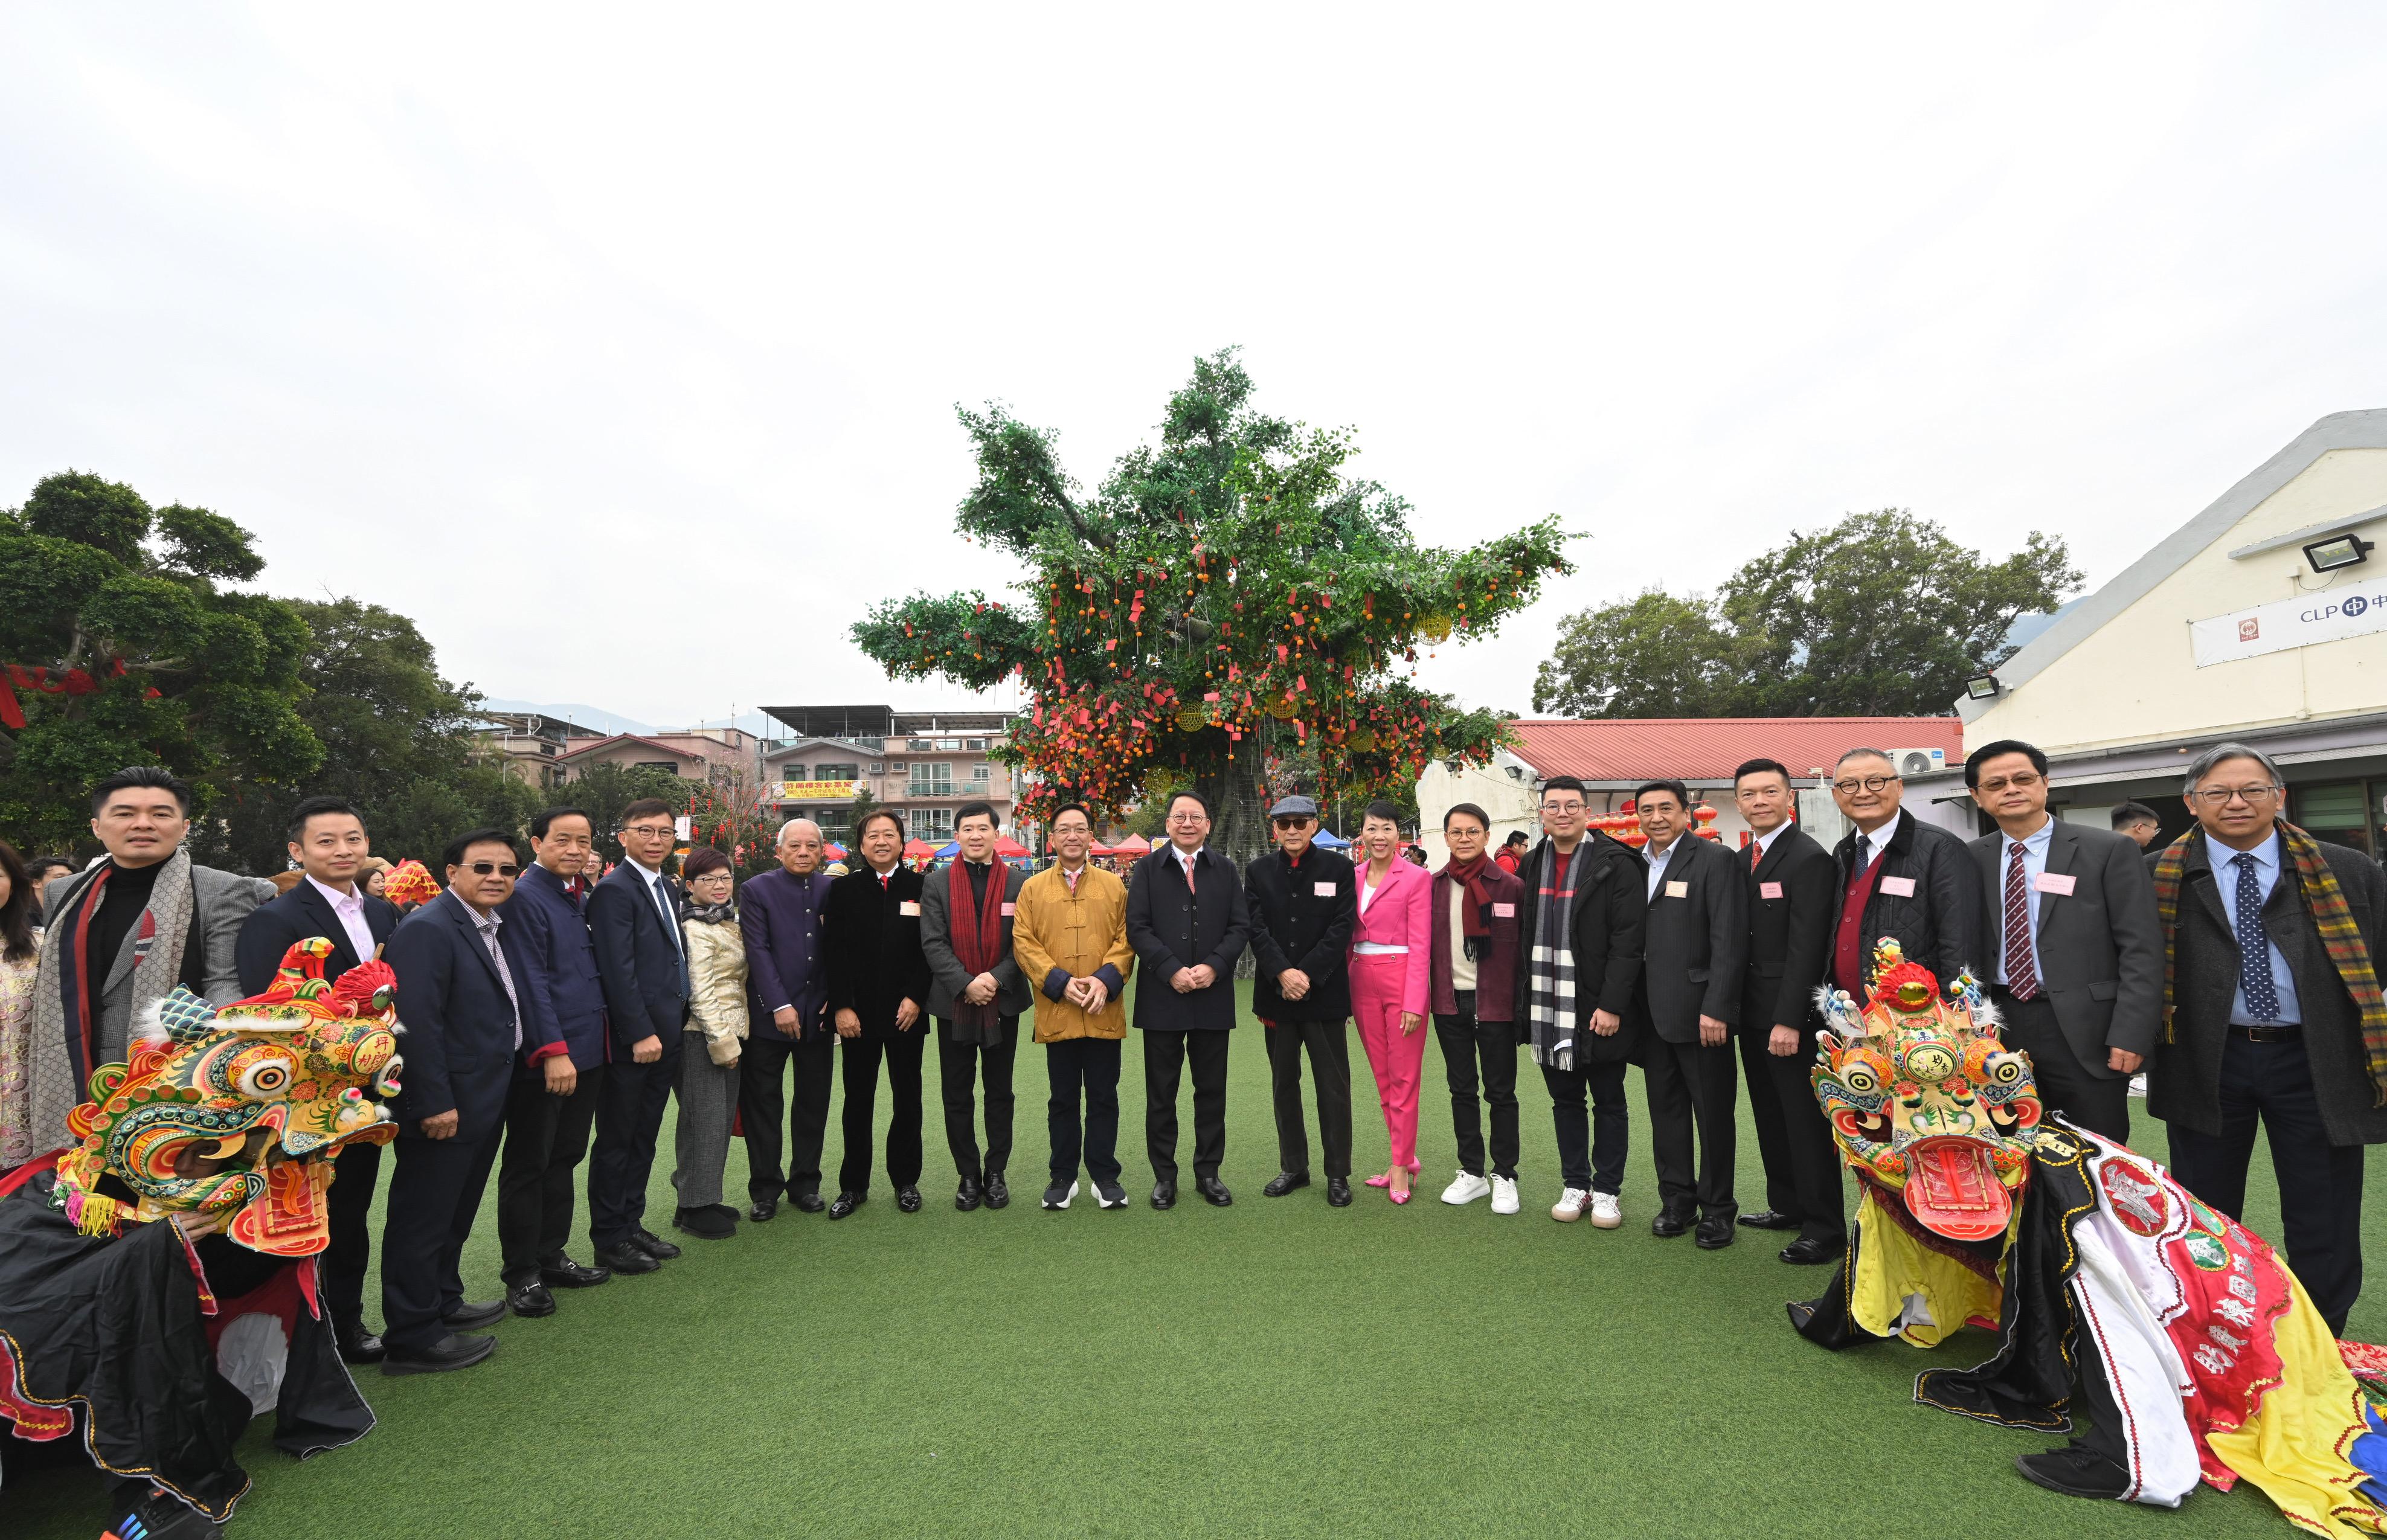 The Chief Secretary for Administration, Mr Chan Kwok-ki, attends the Hong Kong Well-wishing Festival 2024 at Lam Tsuen, Tai Po, today (February 10), on the first day of the Lunar New Year. Photo shows Mr Chan (tenth right); the initiator of the Hong Kong Well-wishing Festival, Mr Cheung Hok-ming (ninth right); the Chairman of the Heung Yee Kuk New Territories, Mr Kenneth Lau (tenth left), and other guests at the event.